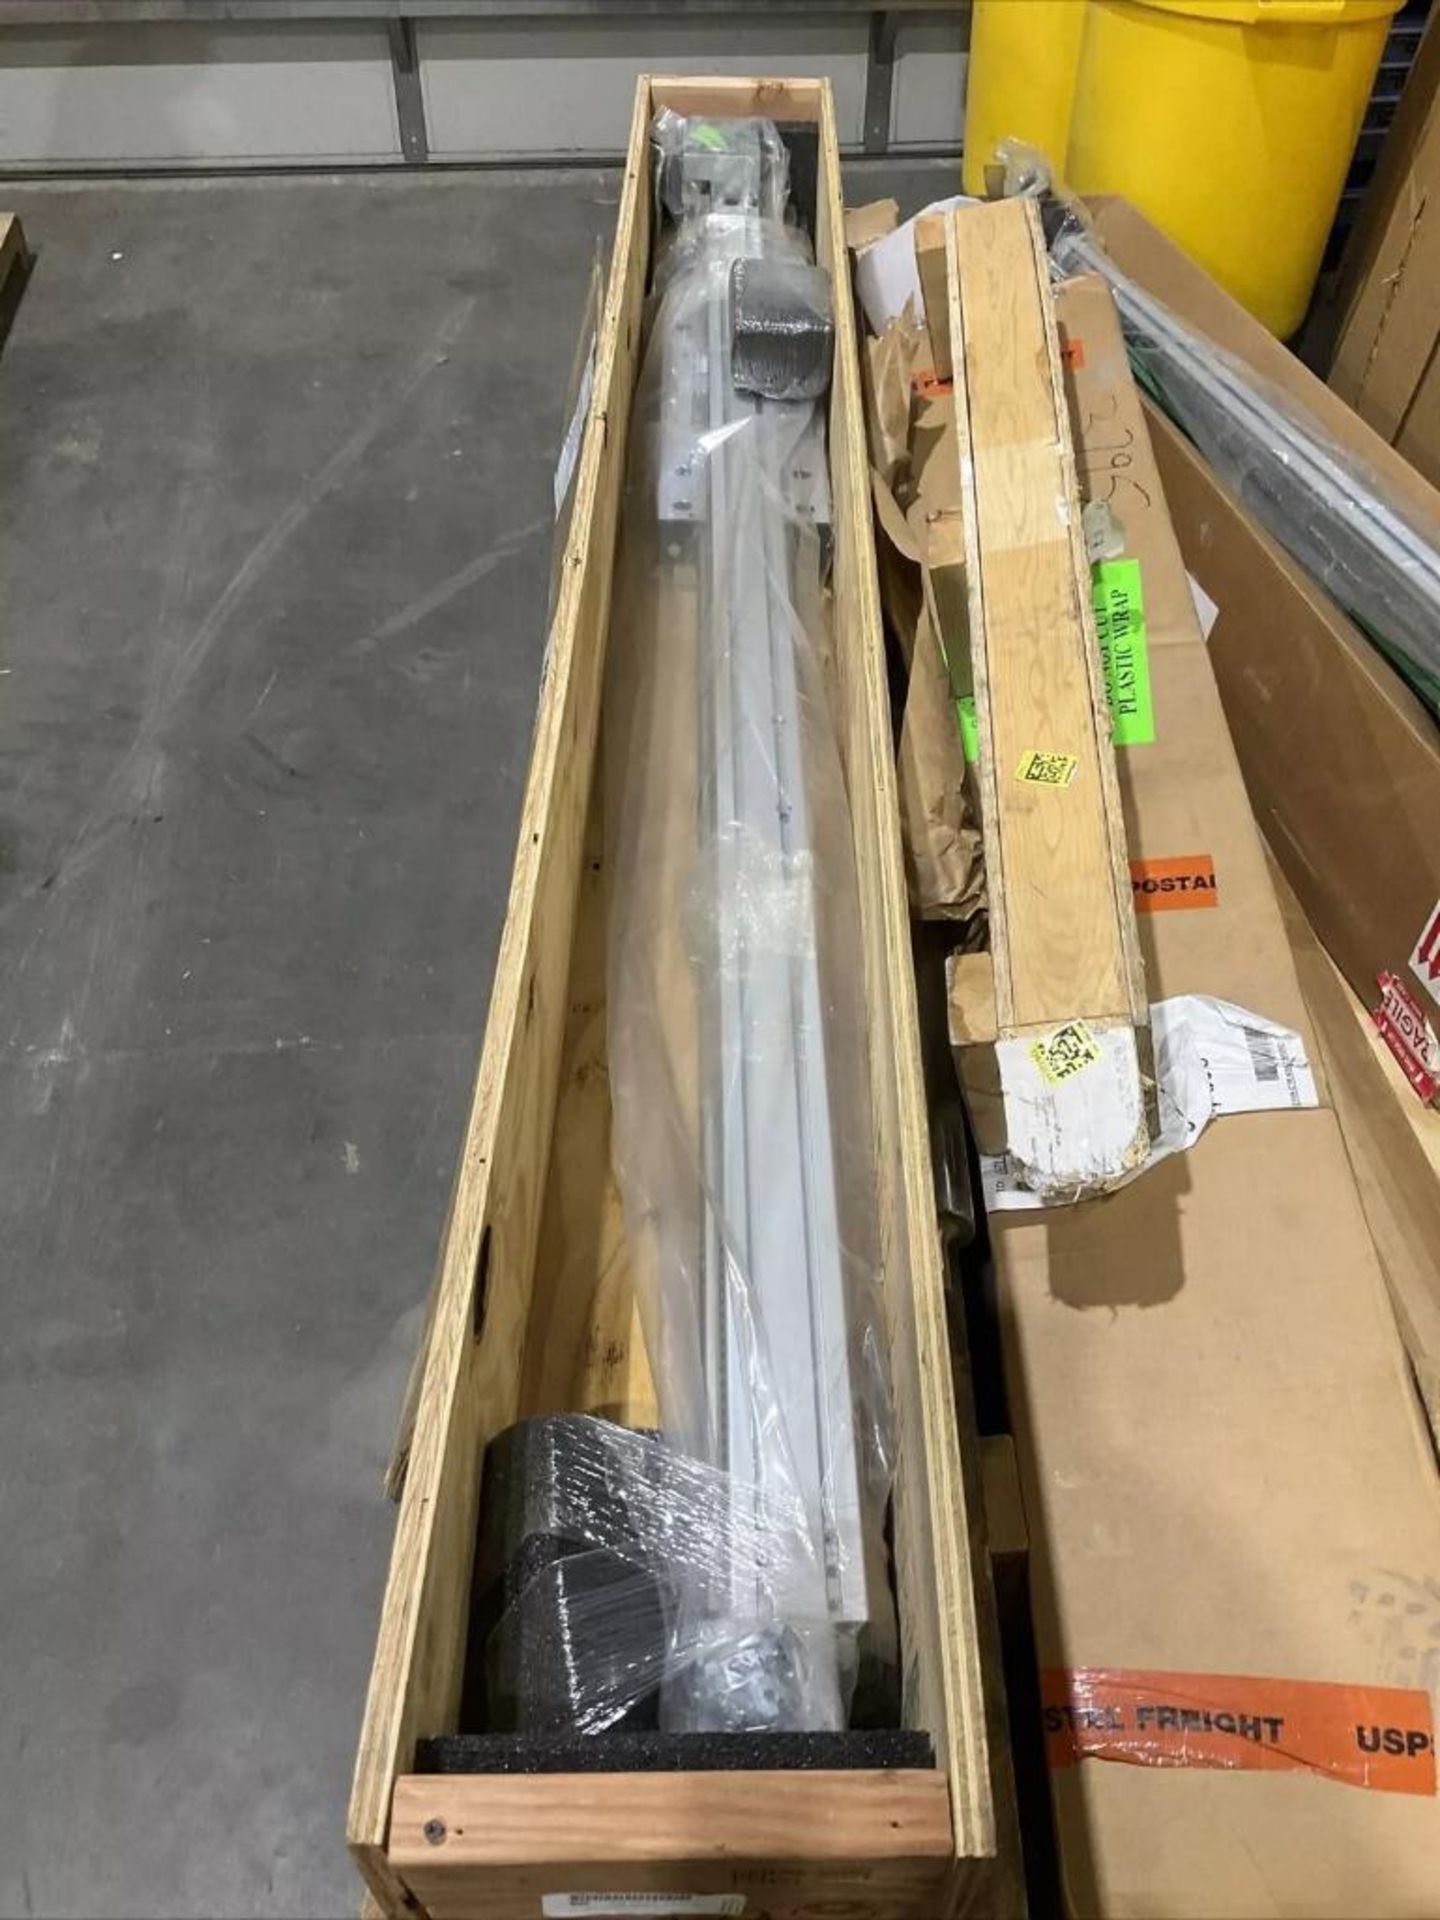 2 PALLETS OF MACRON DYNAMICS LINEAR ACTUATORS; VARIOUS LENGTHS, SIZES, AND CAPACITIES... - Image 13 of 32